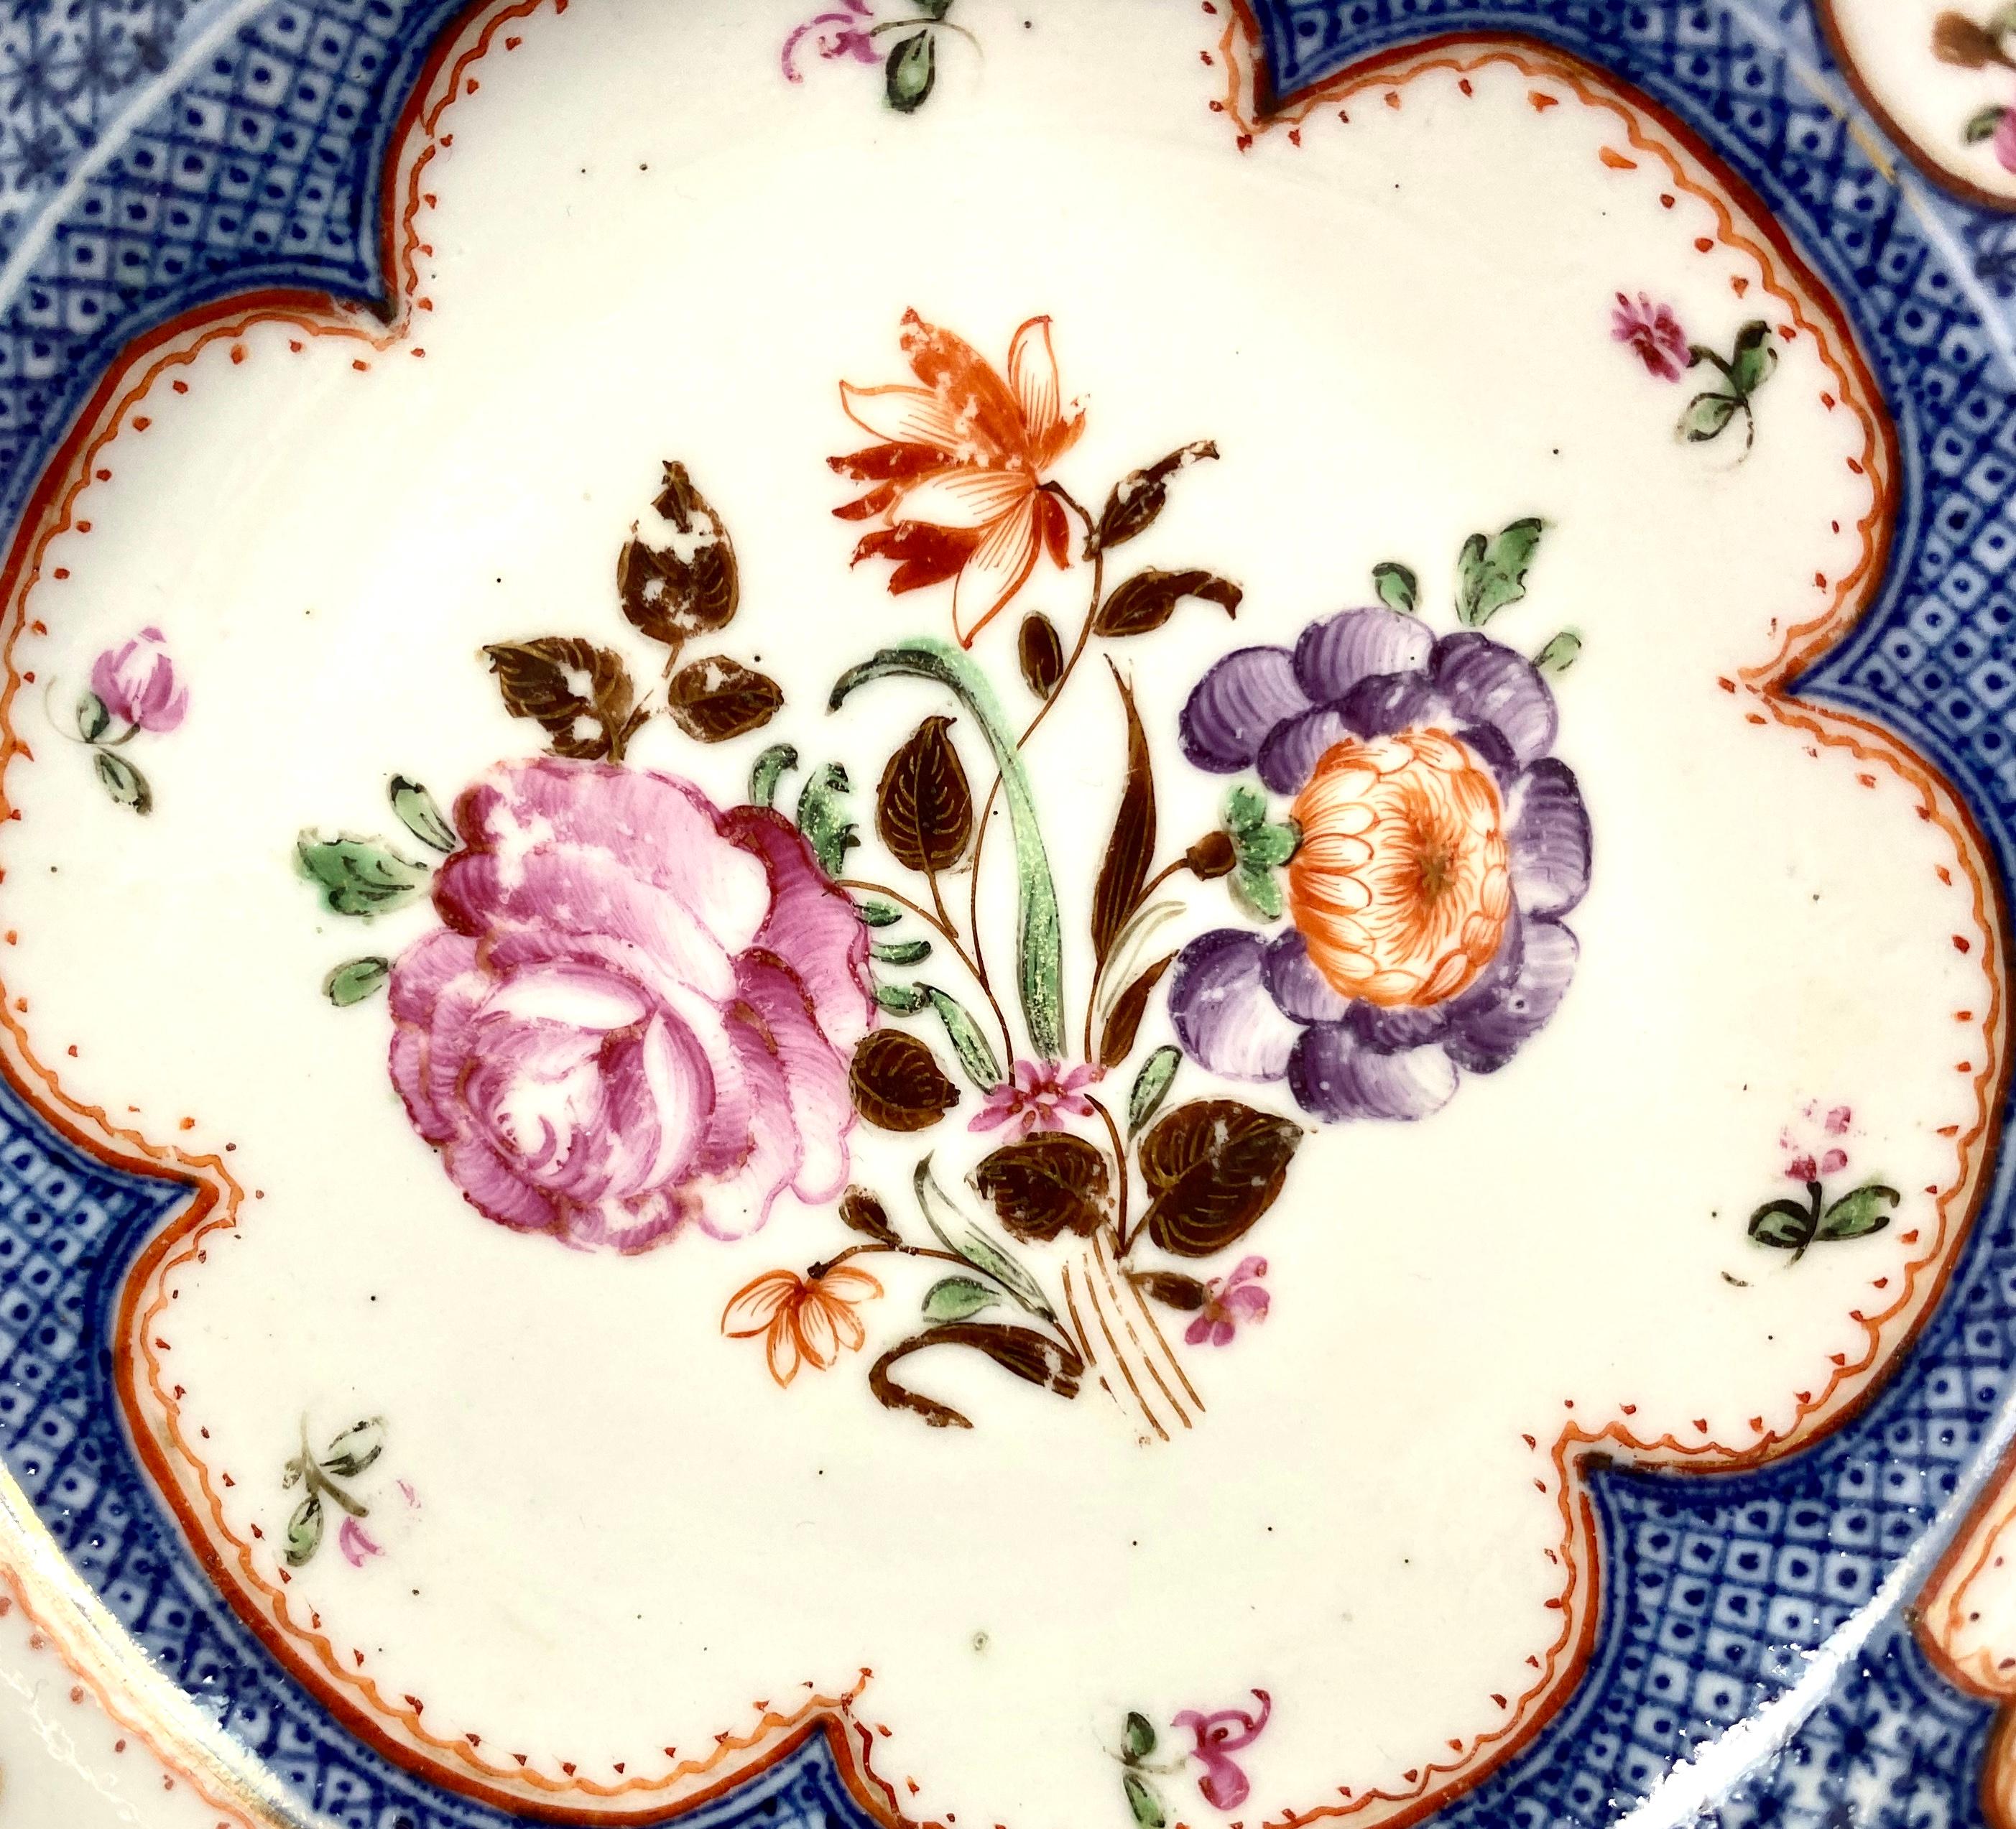 Mid-18th Century Pair of Chinese Porcelain Dishes, Compagnie des Indes circa 1760 Qianlong Period